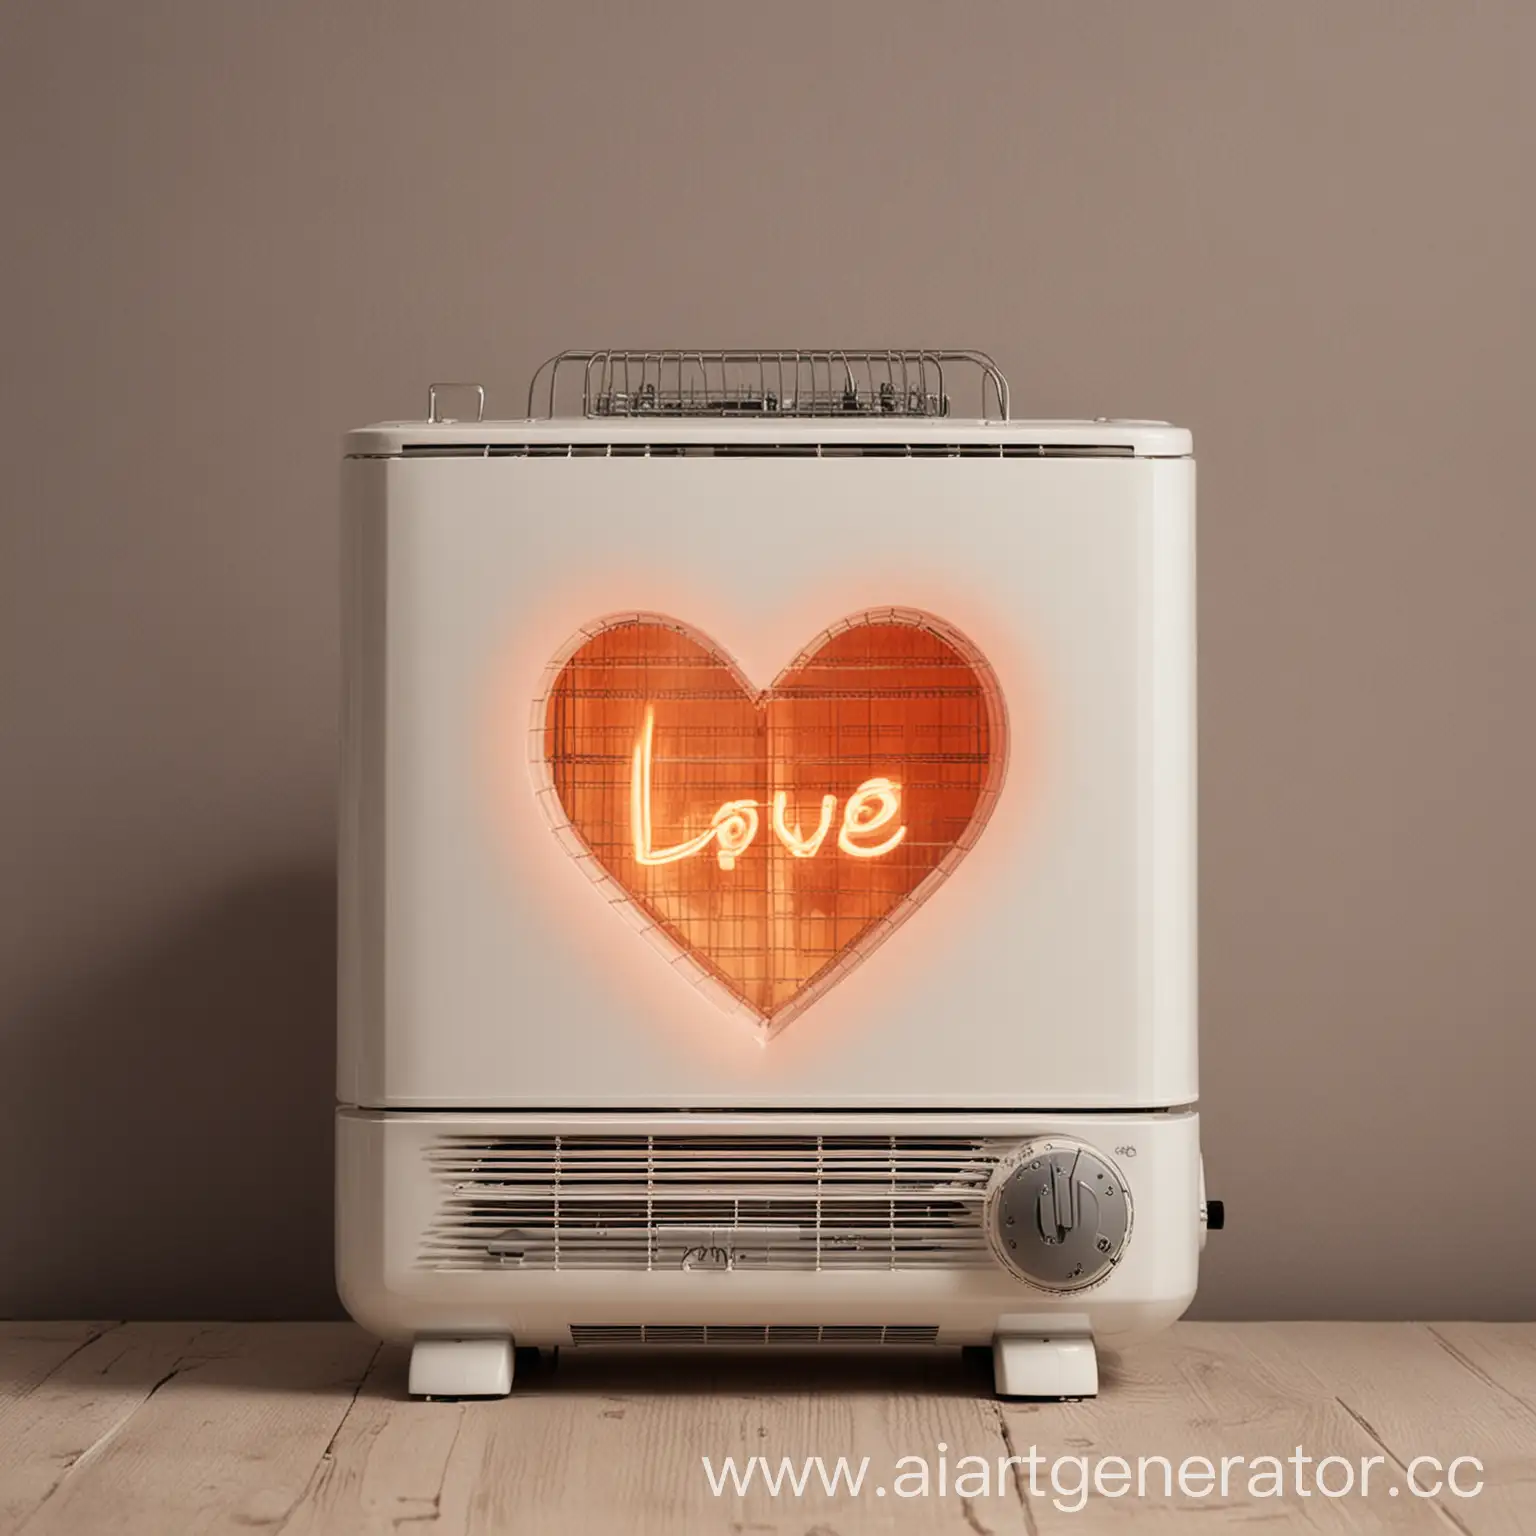 Warmth-and-Affection-Radiant-Love-Shared-by-a-Couple-by-the-Heater